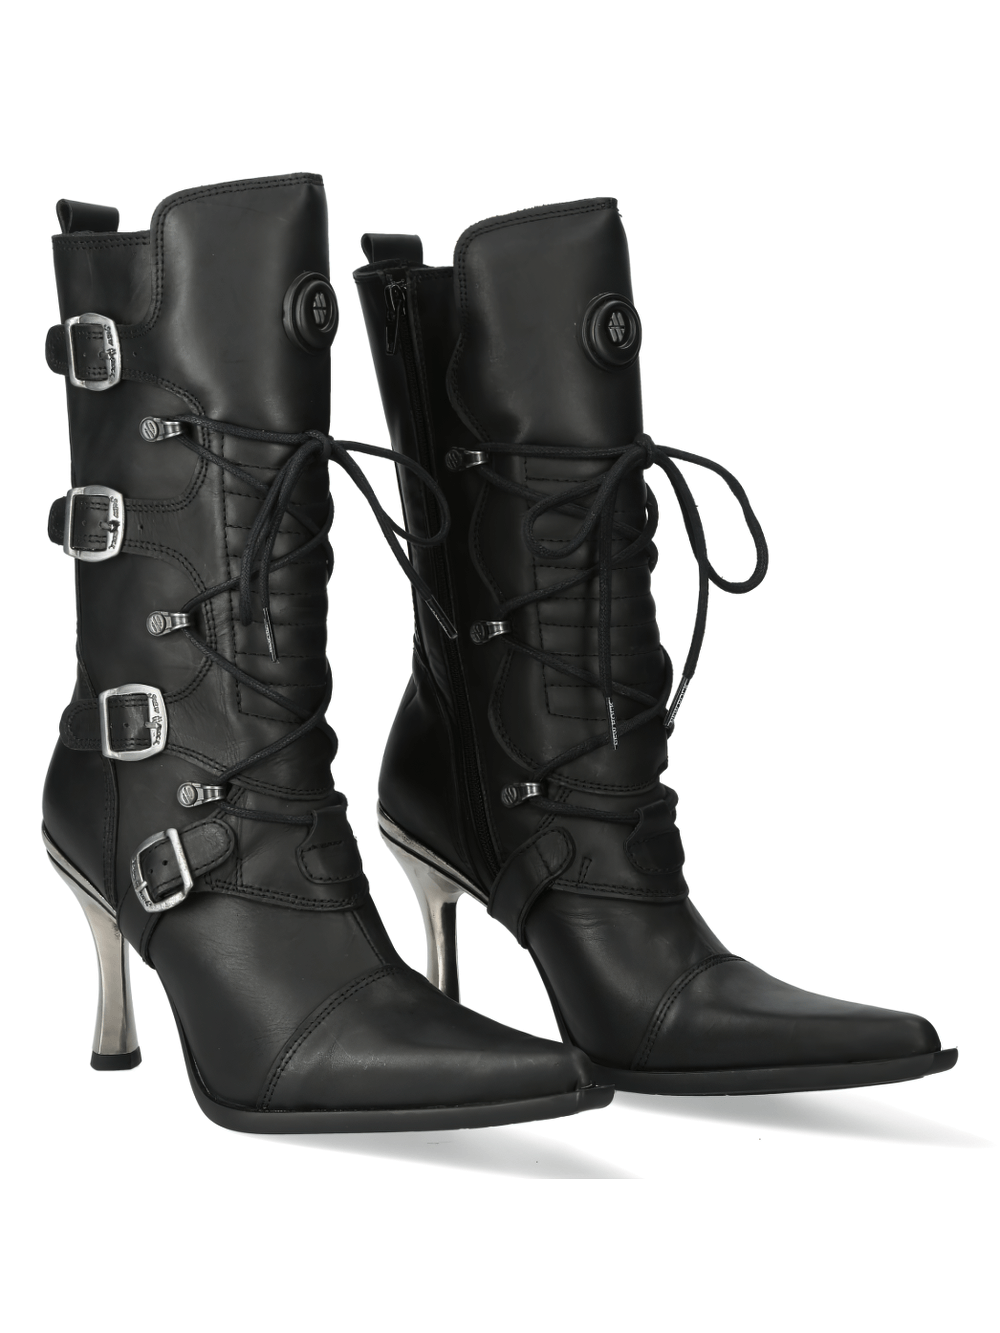 NEW ROCK Laced High-Heel Boots with Metallic Accents